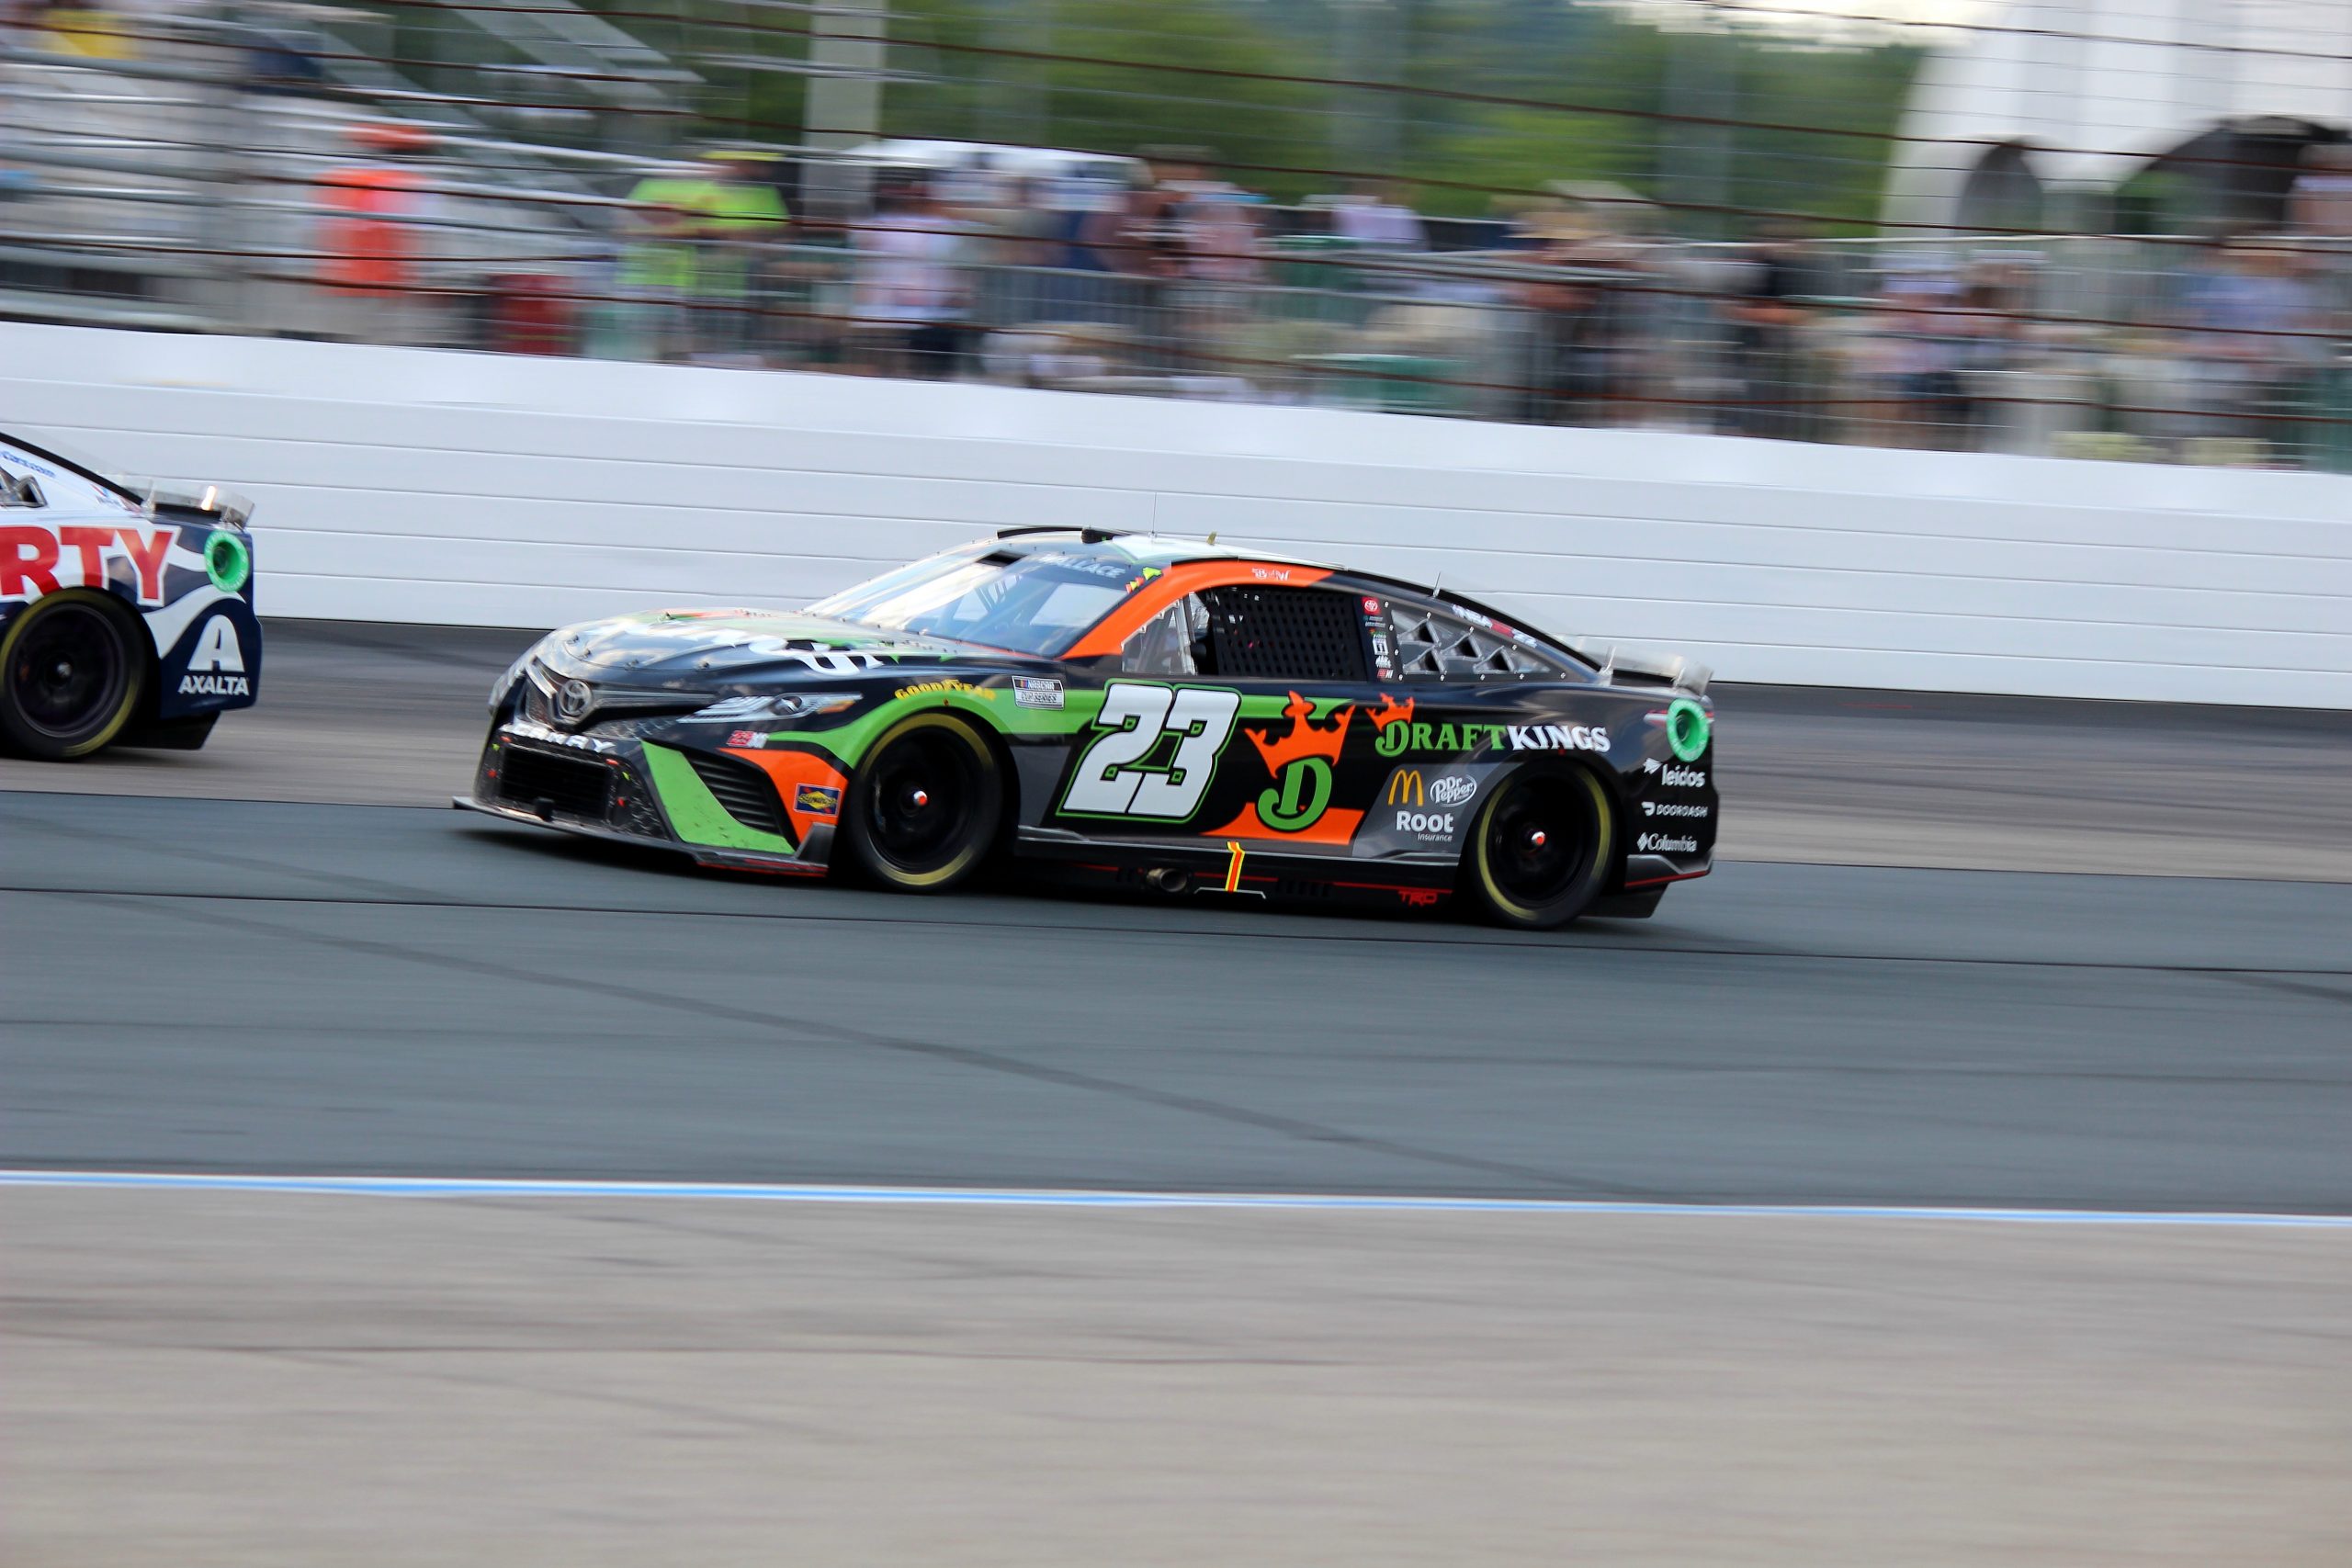 The unmistakable No. 23 Toyota Camry of Wallace was lighting fast. (Photo: Josh Jones | The Podium Finish)